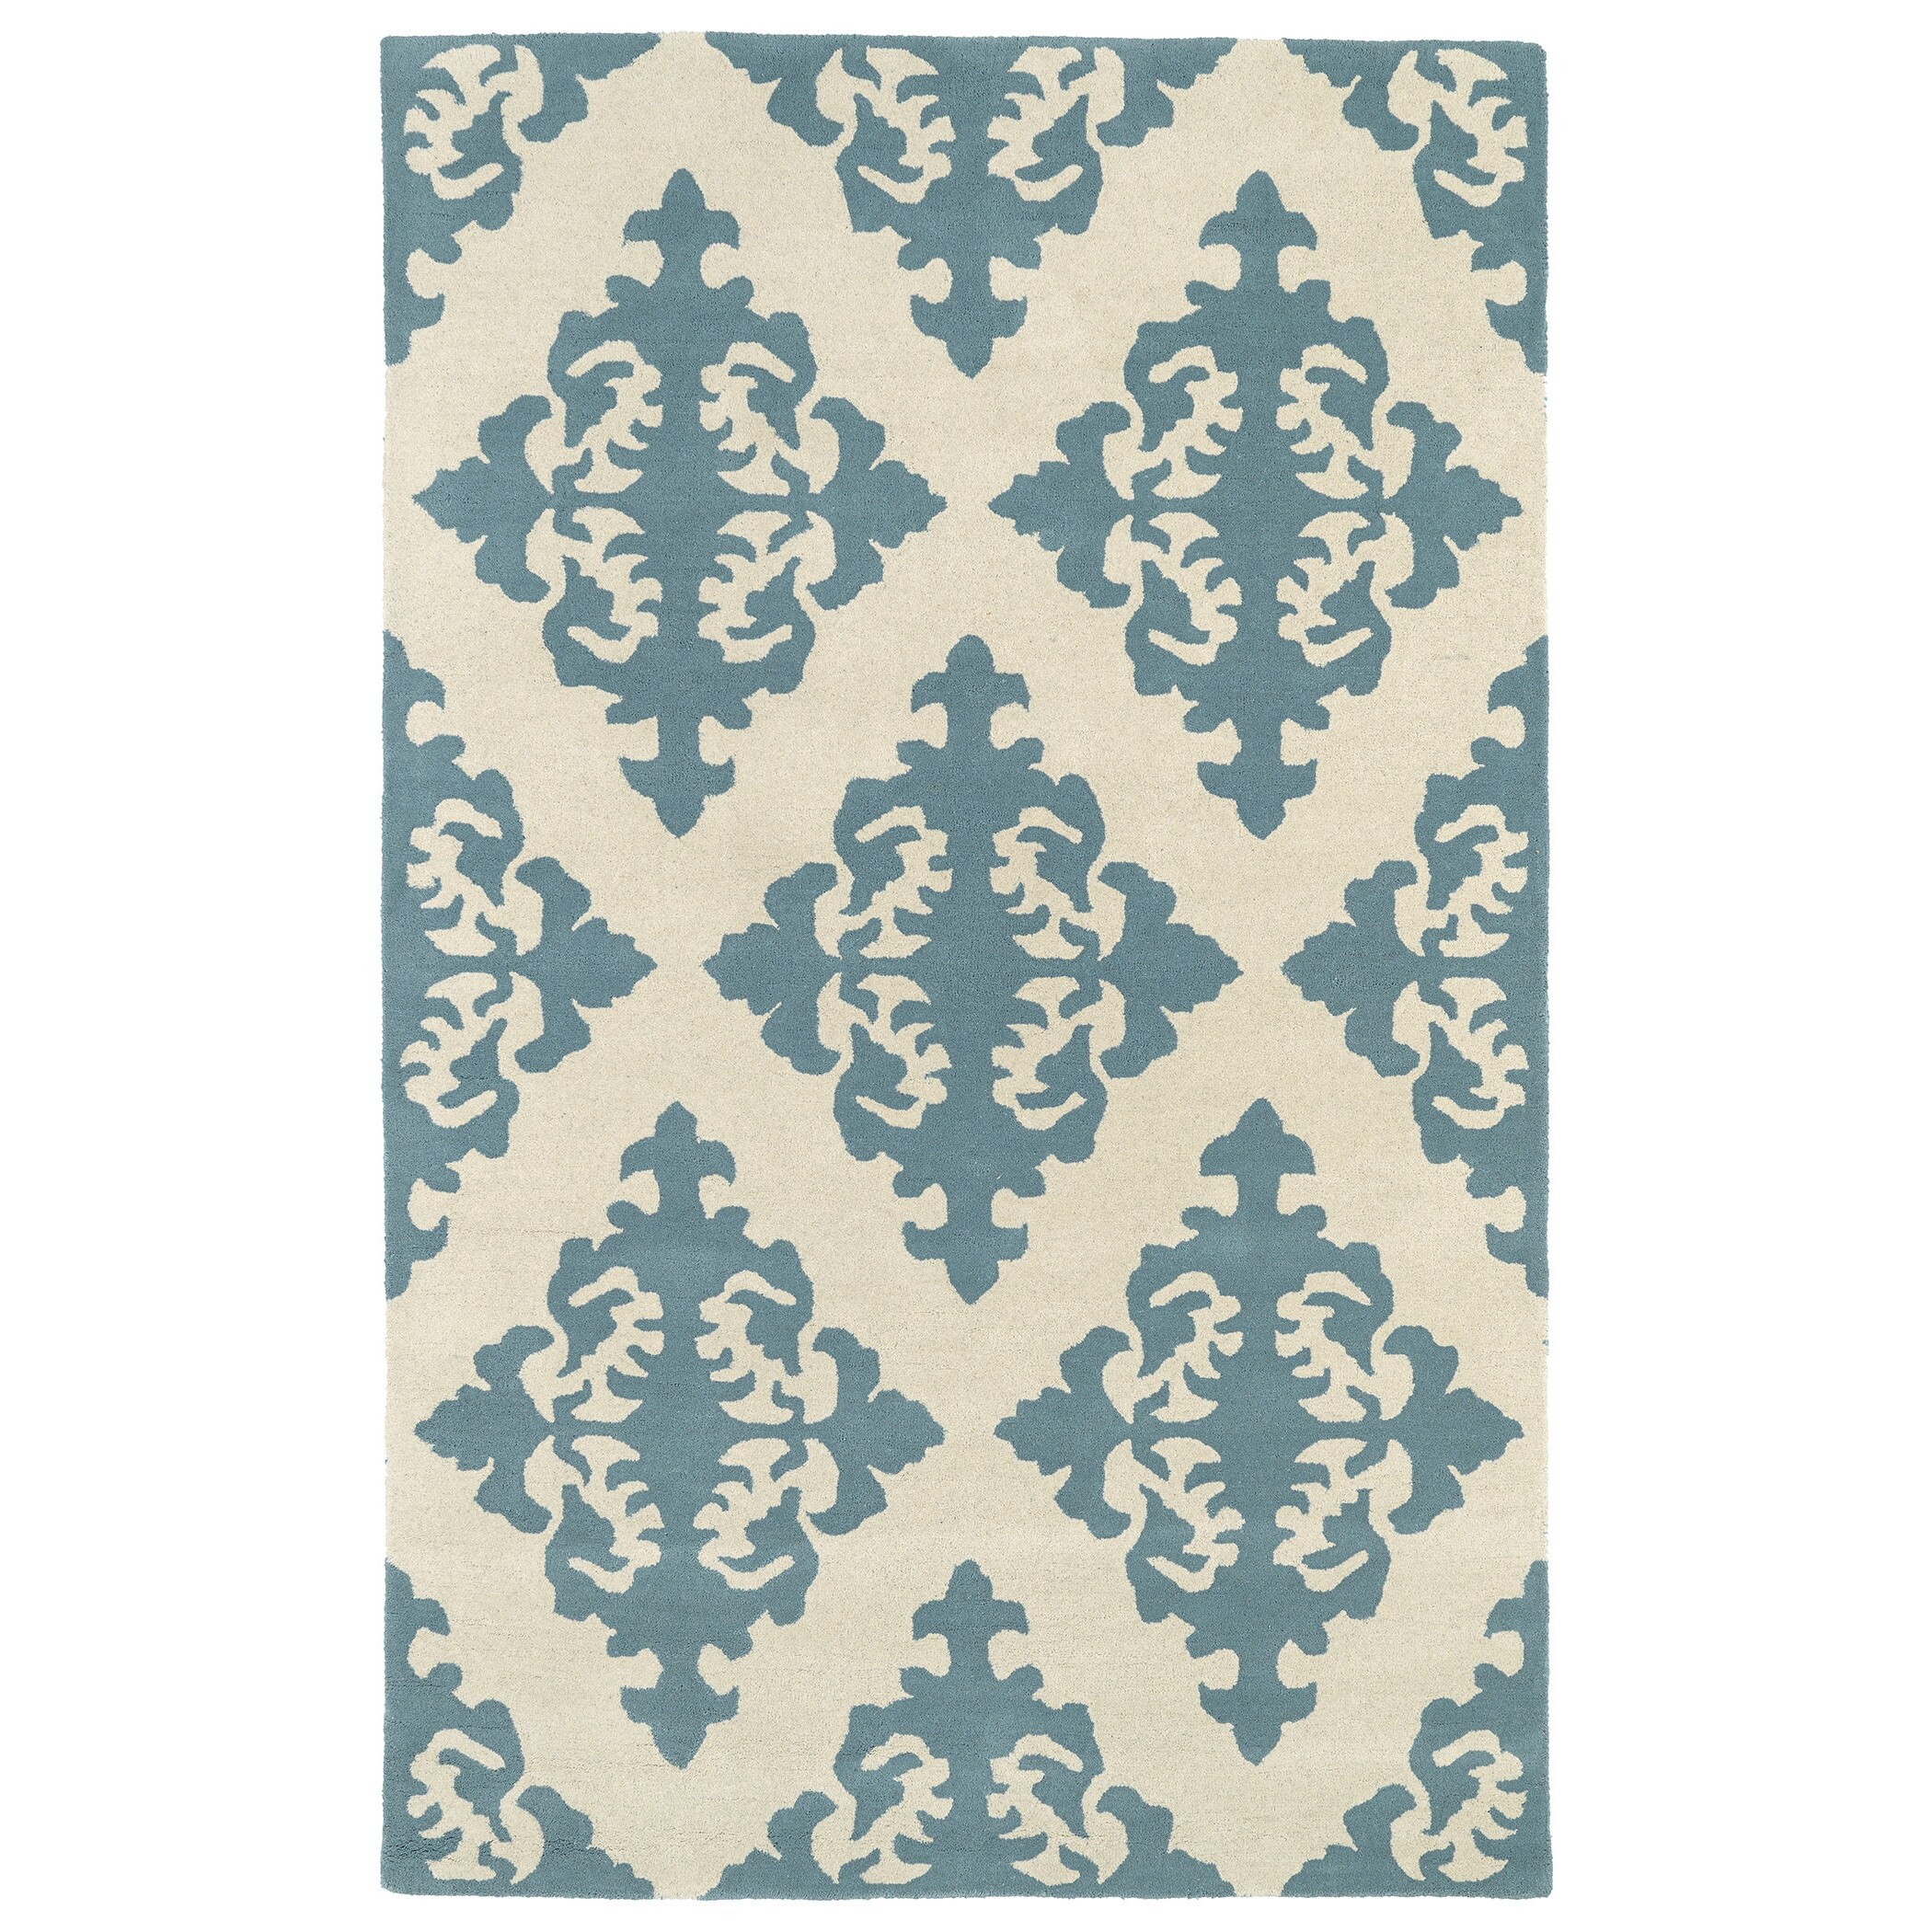 Kaleen Rugs Hand tufted Runway Blue/ Ivory Damask Wool Rug (96 X 13) Blue Size 96 x 13